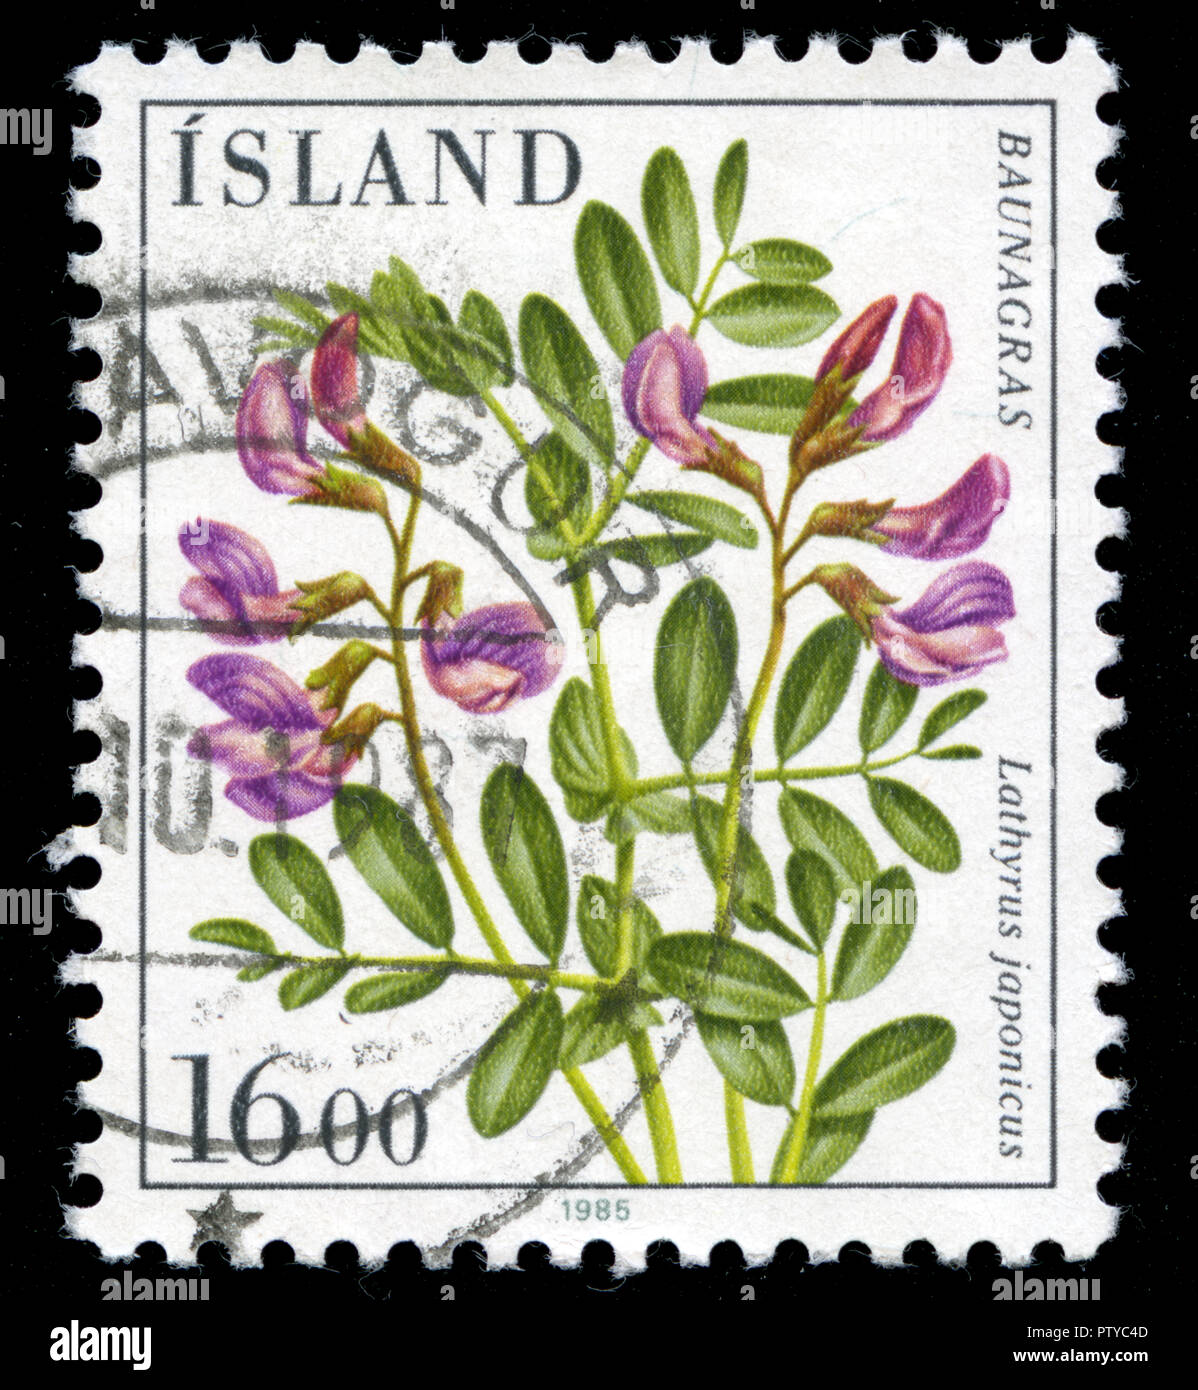 Postmarked stamp from Iceland in the Flowers series issued in 1985 Stock Photo